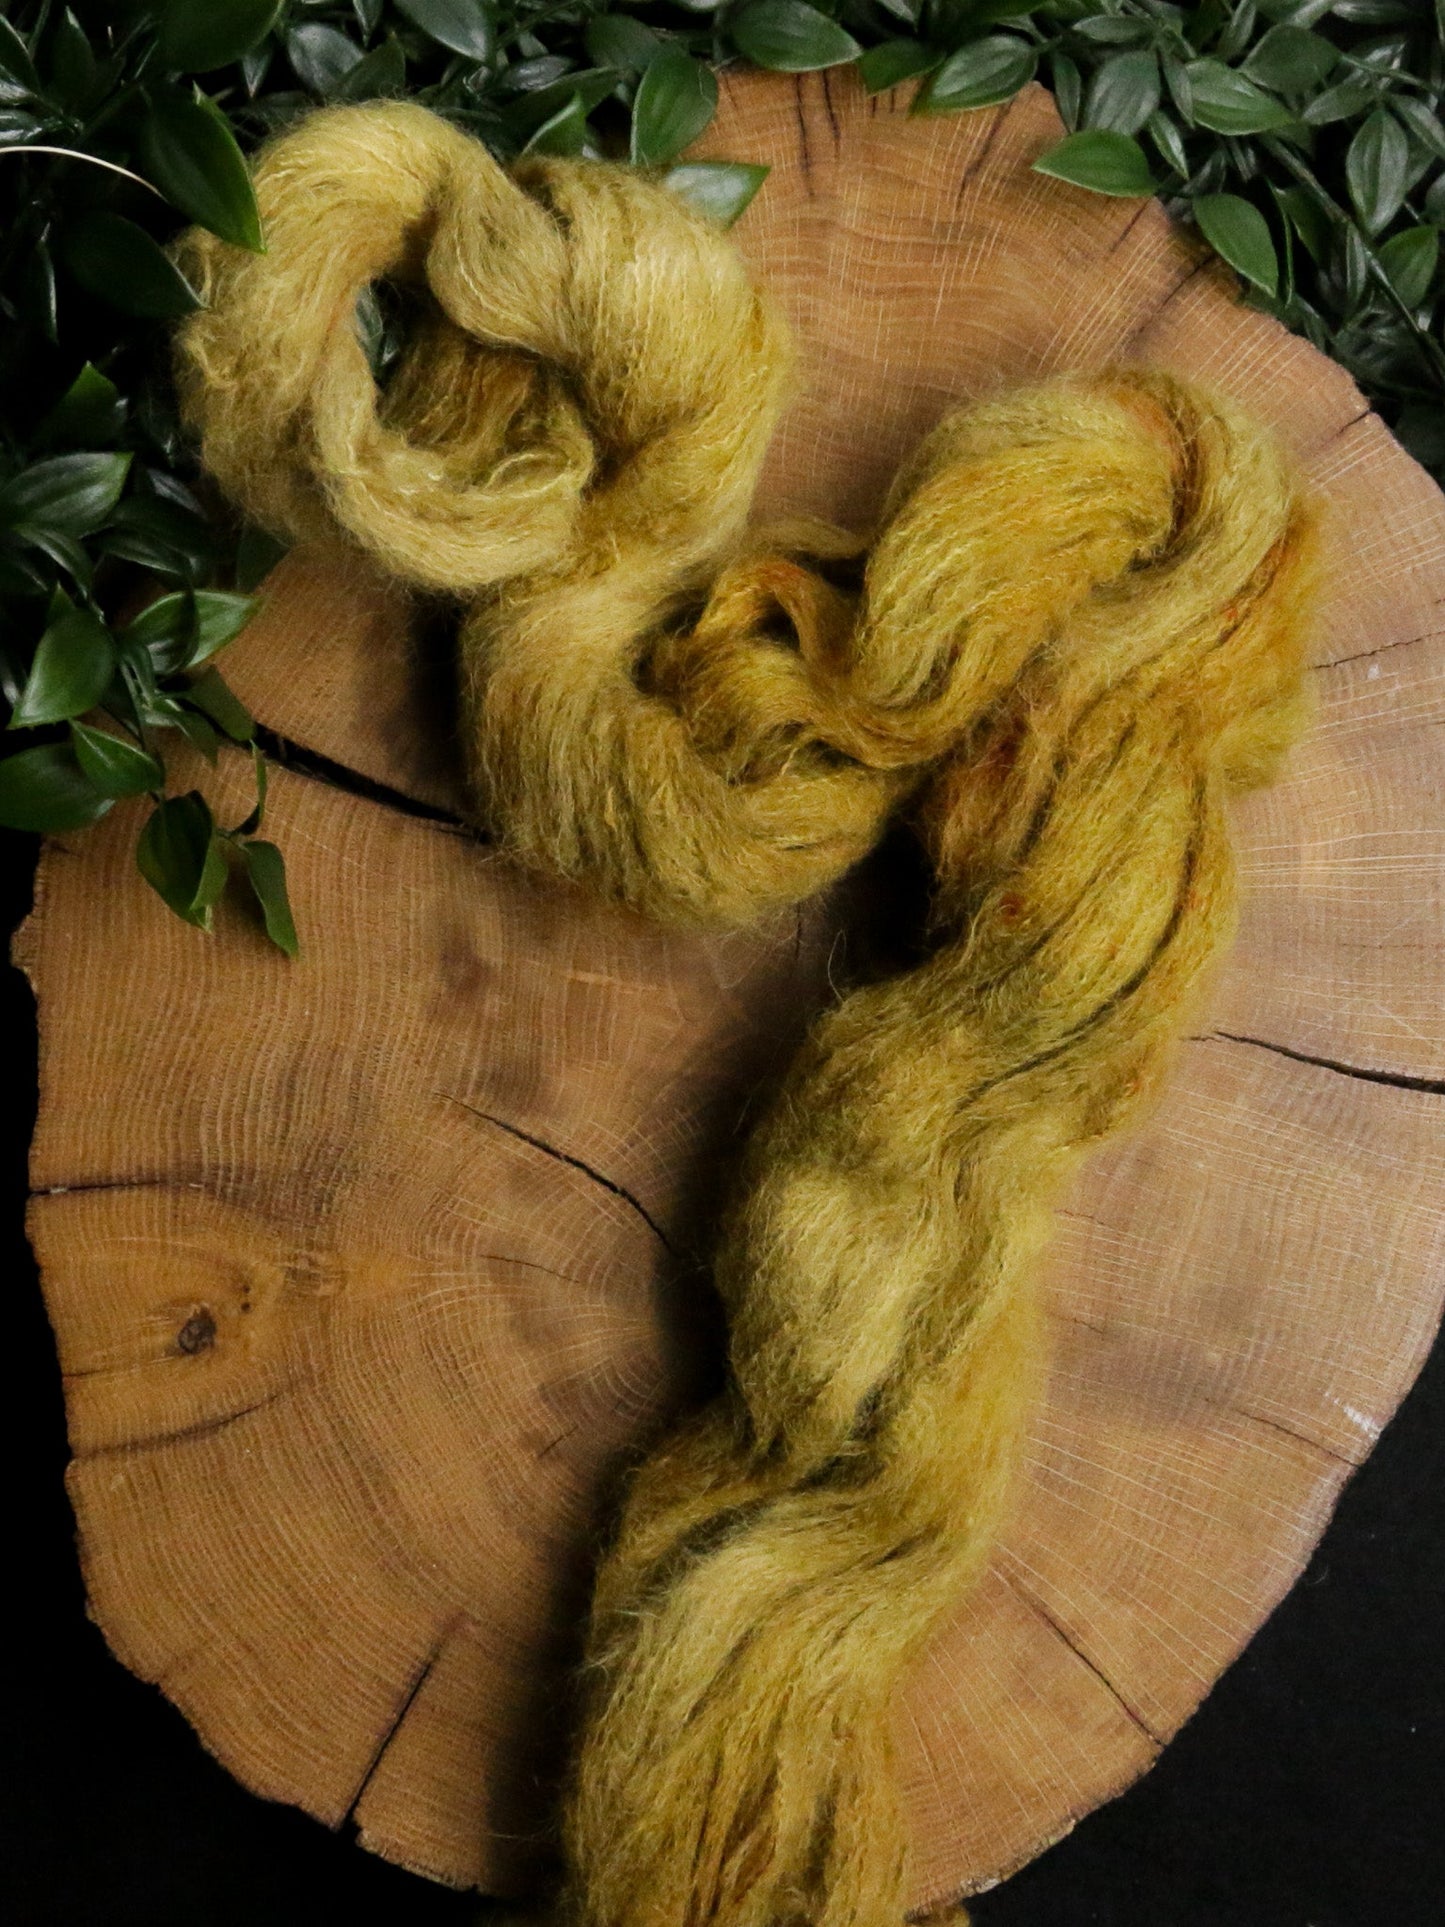 Decaying Leaves - Suri Alpaca Lace - Lace Weight